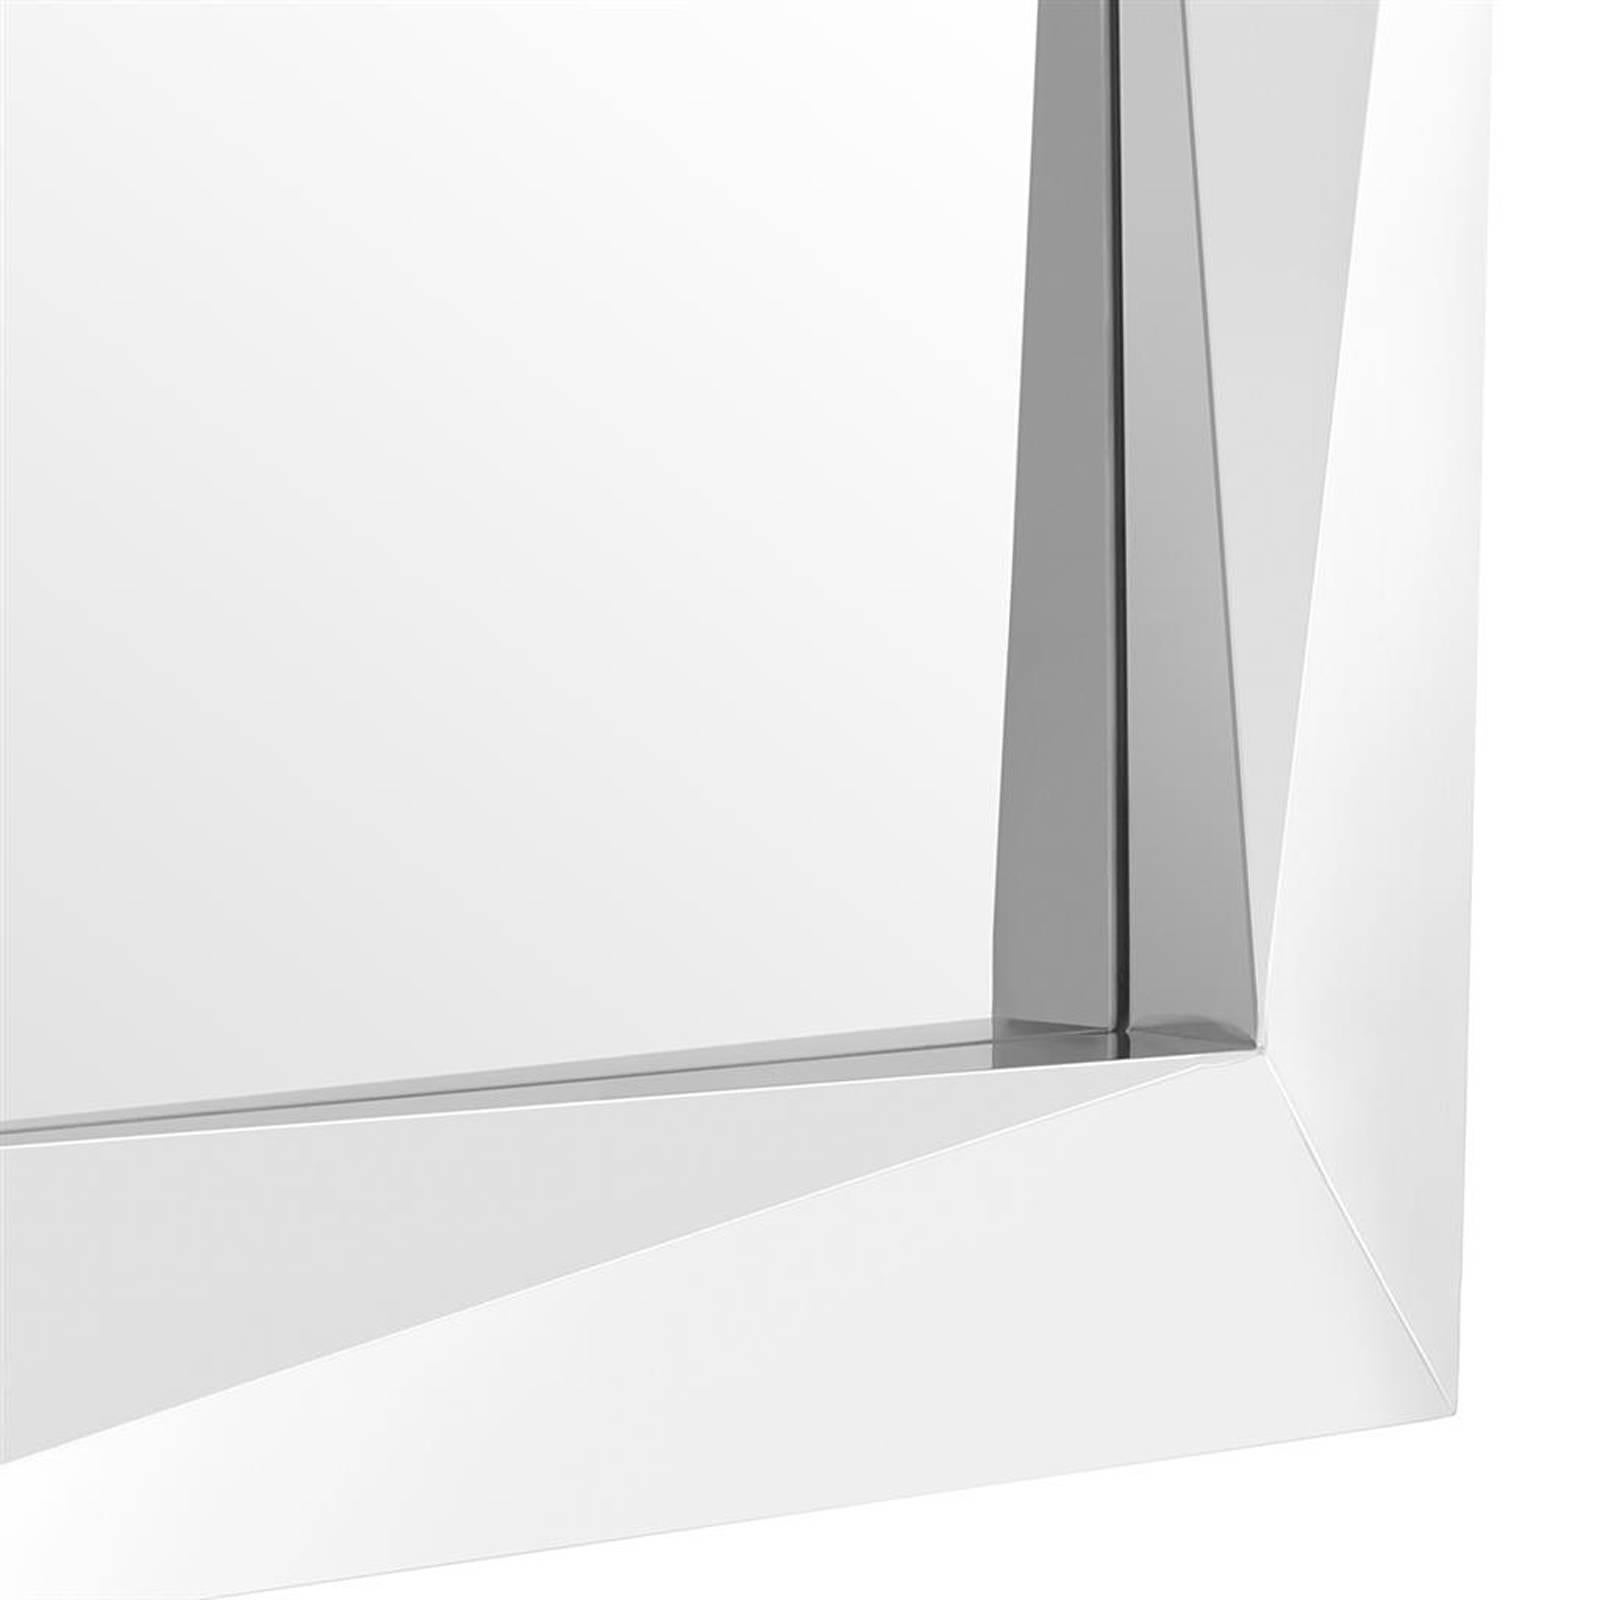 Axis Square Mirror in Gold Finish or in Polished Stainless Steel 4